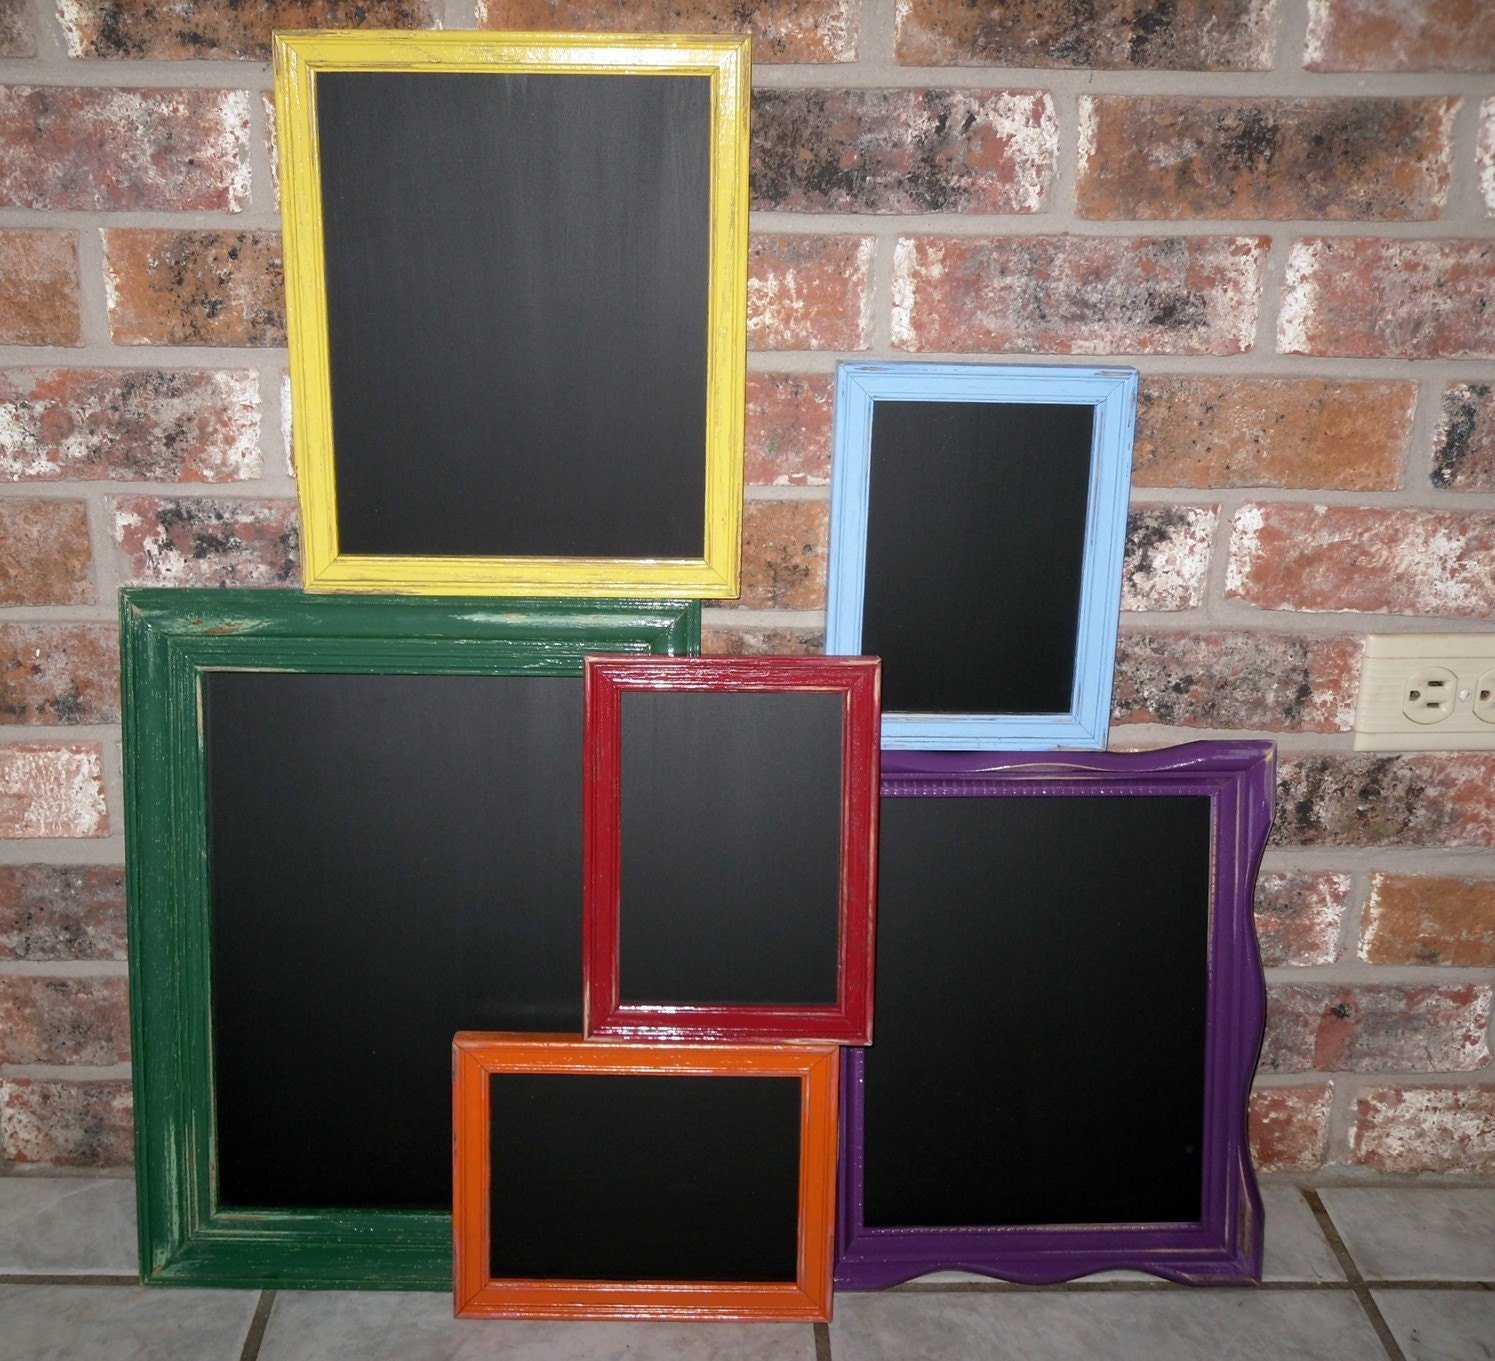 Over The Rainbow Upcycled Chalkboard Frames